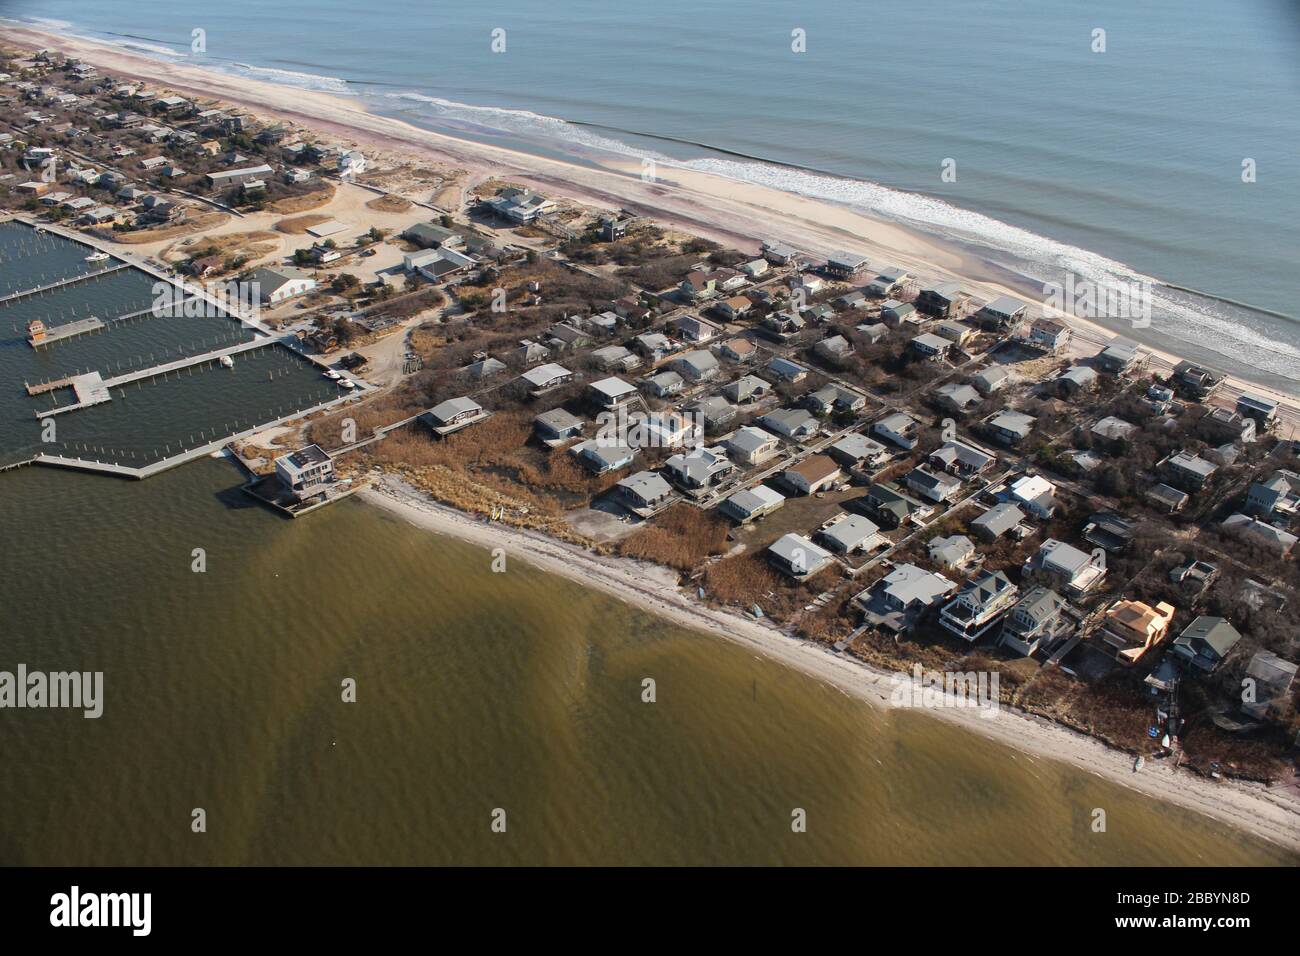 Fire Island ranged in damage from Hurricane Sandy. At the time when this photo was taken, this area appeared quiet with a bit of construction equipment handling the hardest hit sand streets. Stock Photo